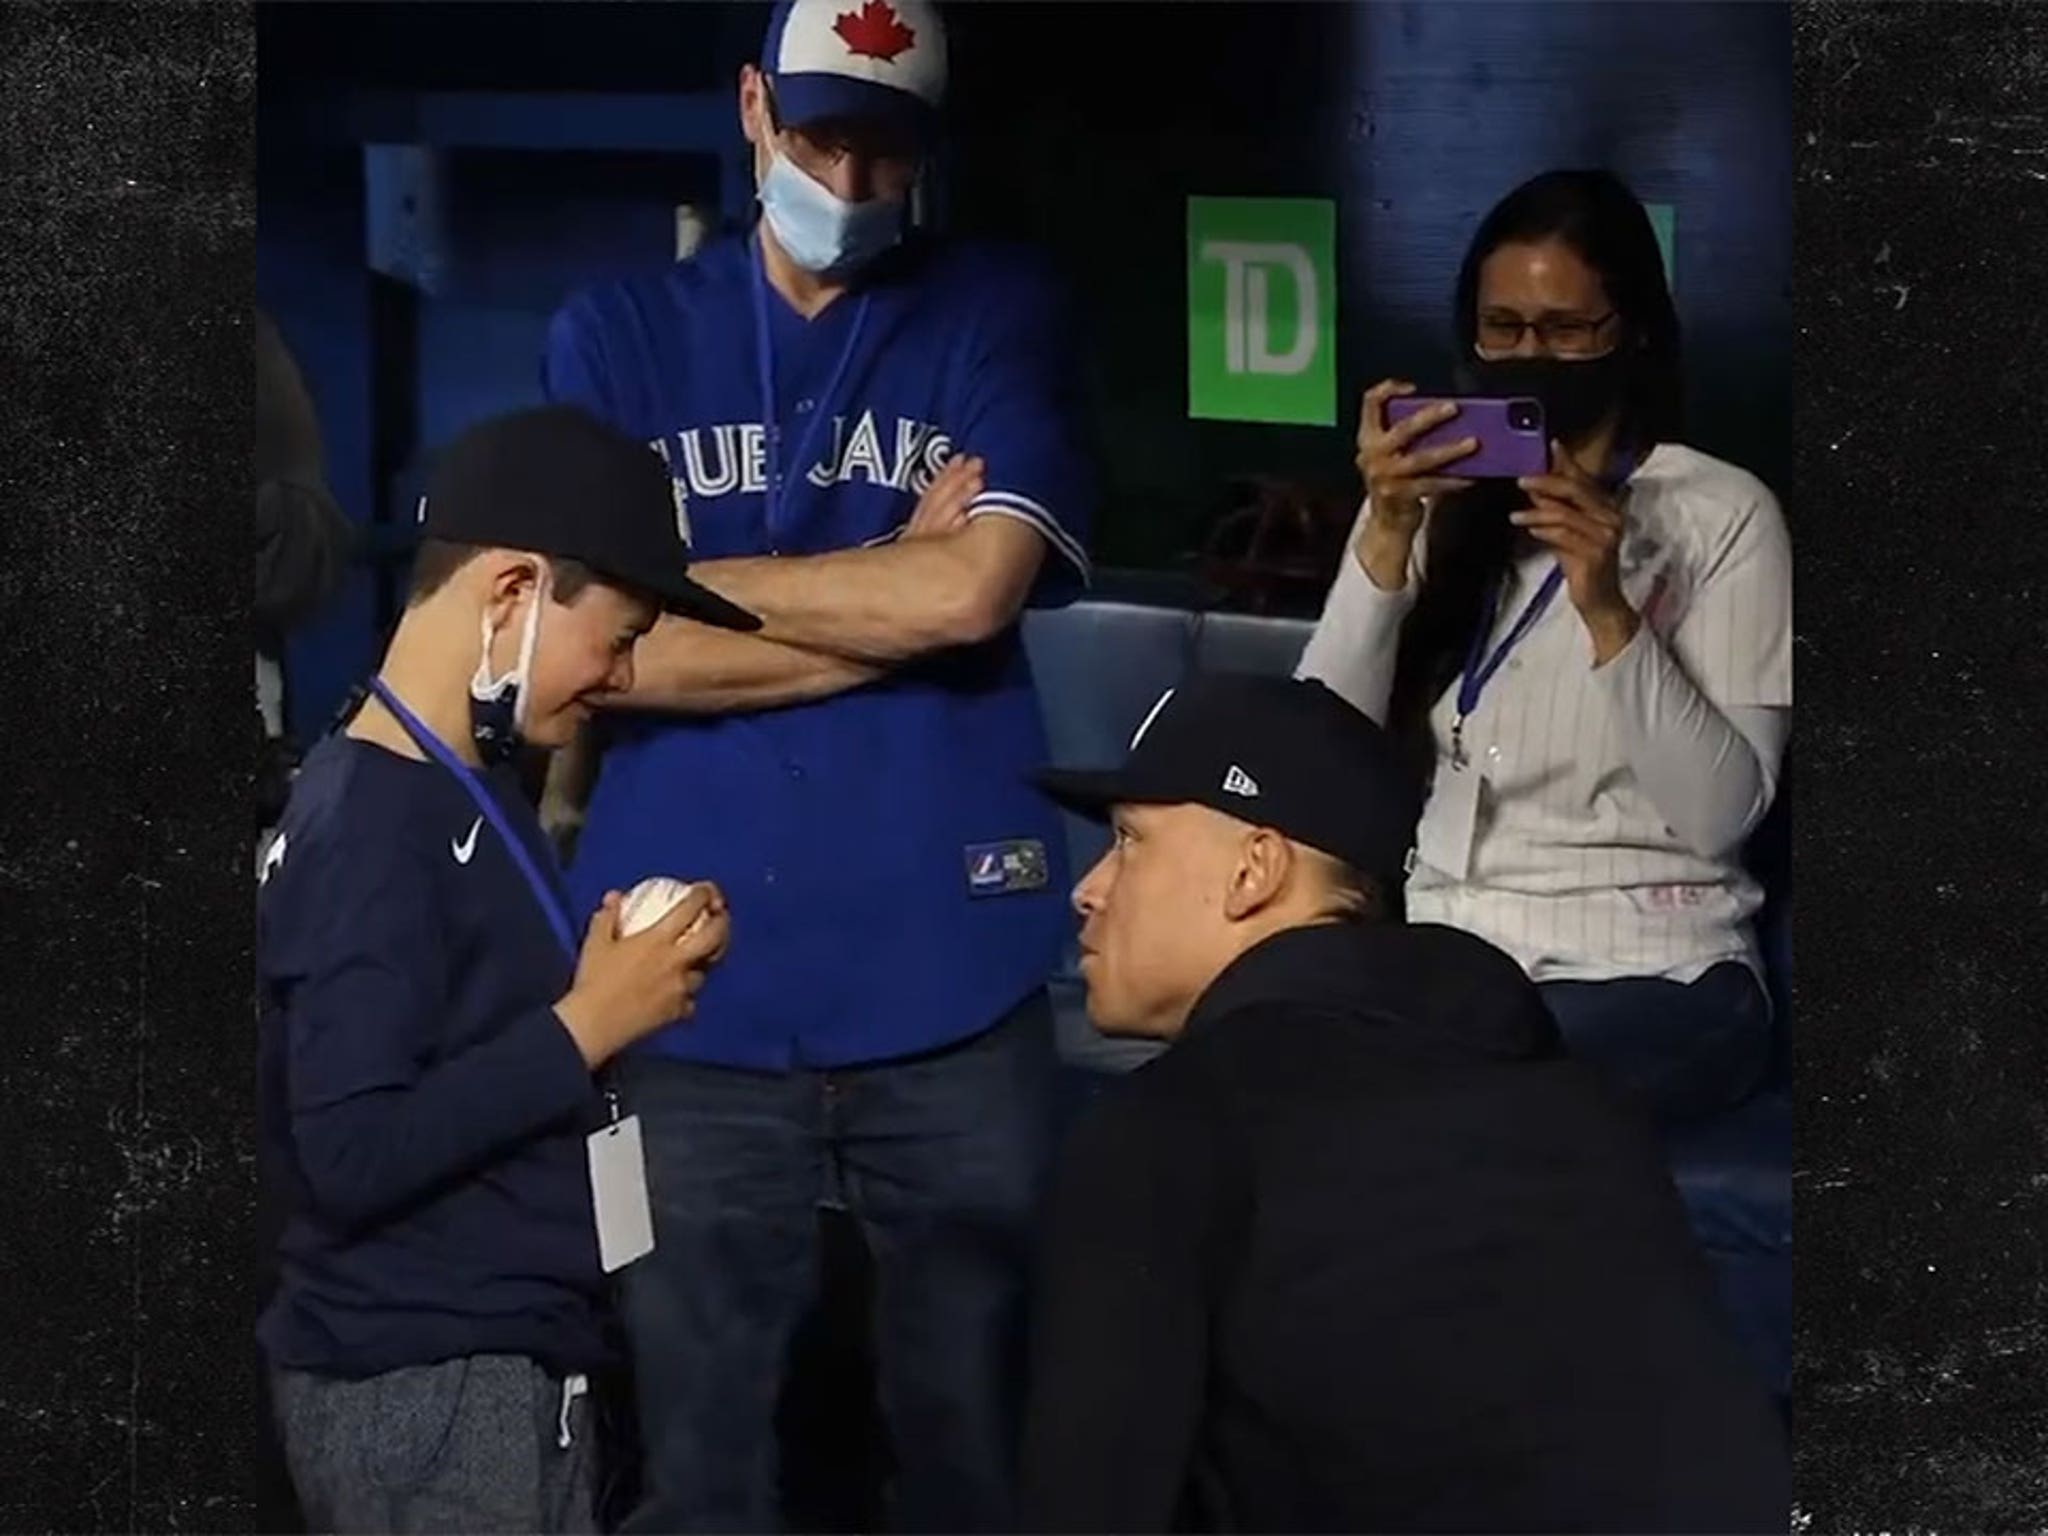 Act of Kindness: Young New York Yankees fan has tears of joy after being  gifted Aaron Judge's HR ball by Toronto Blue Jays fan - ABC7 Chicago